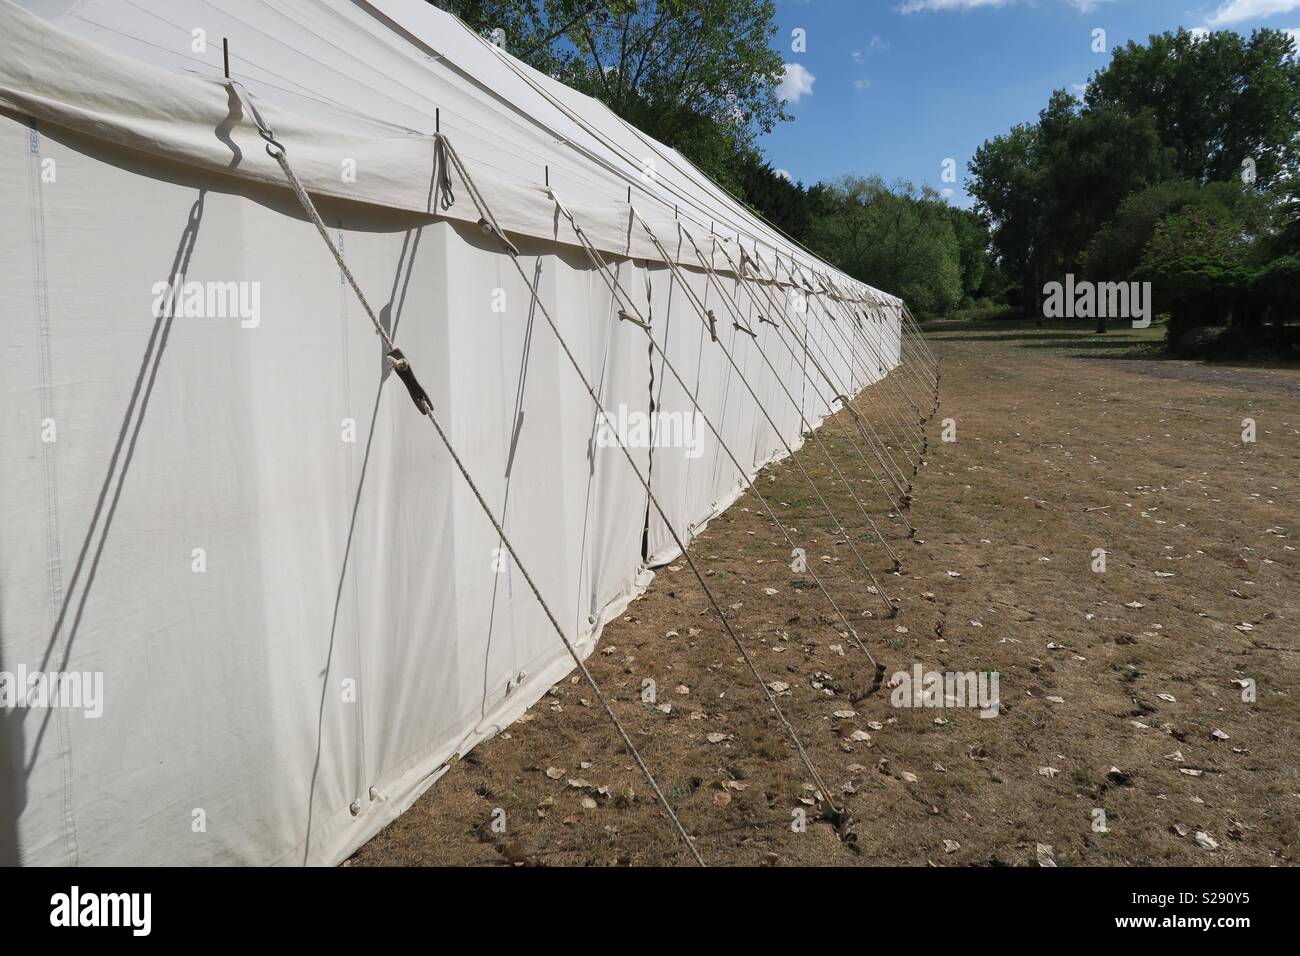 Summer party marquee. Stock Photo